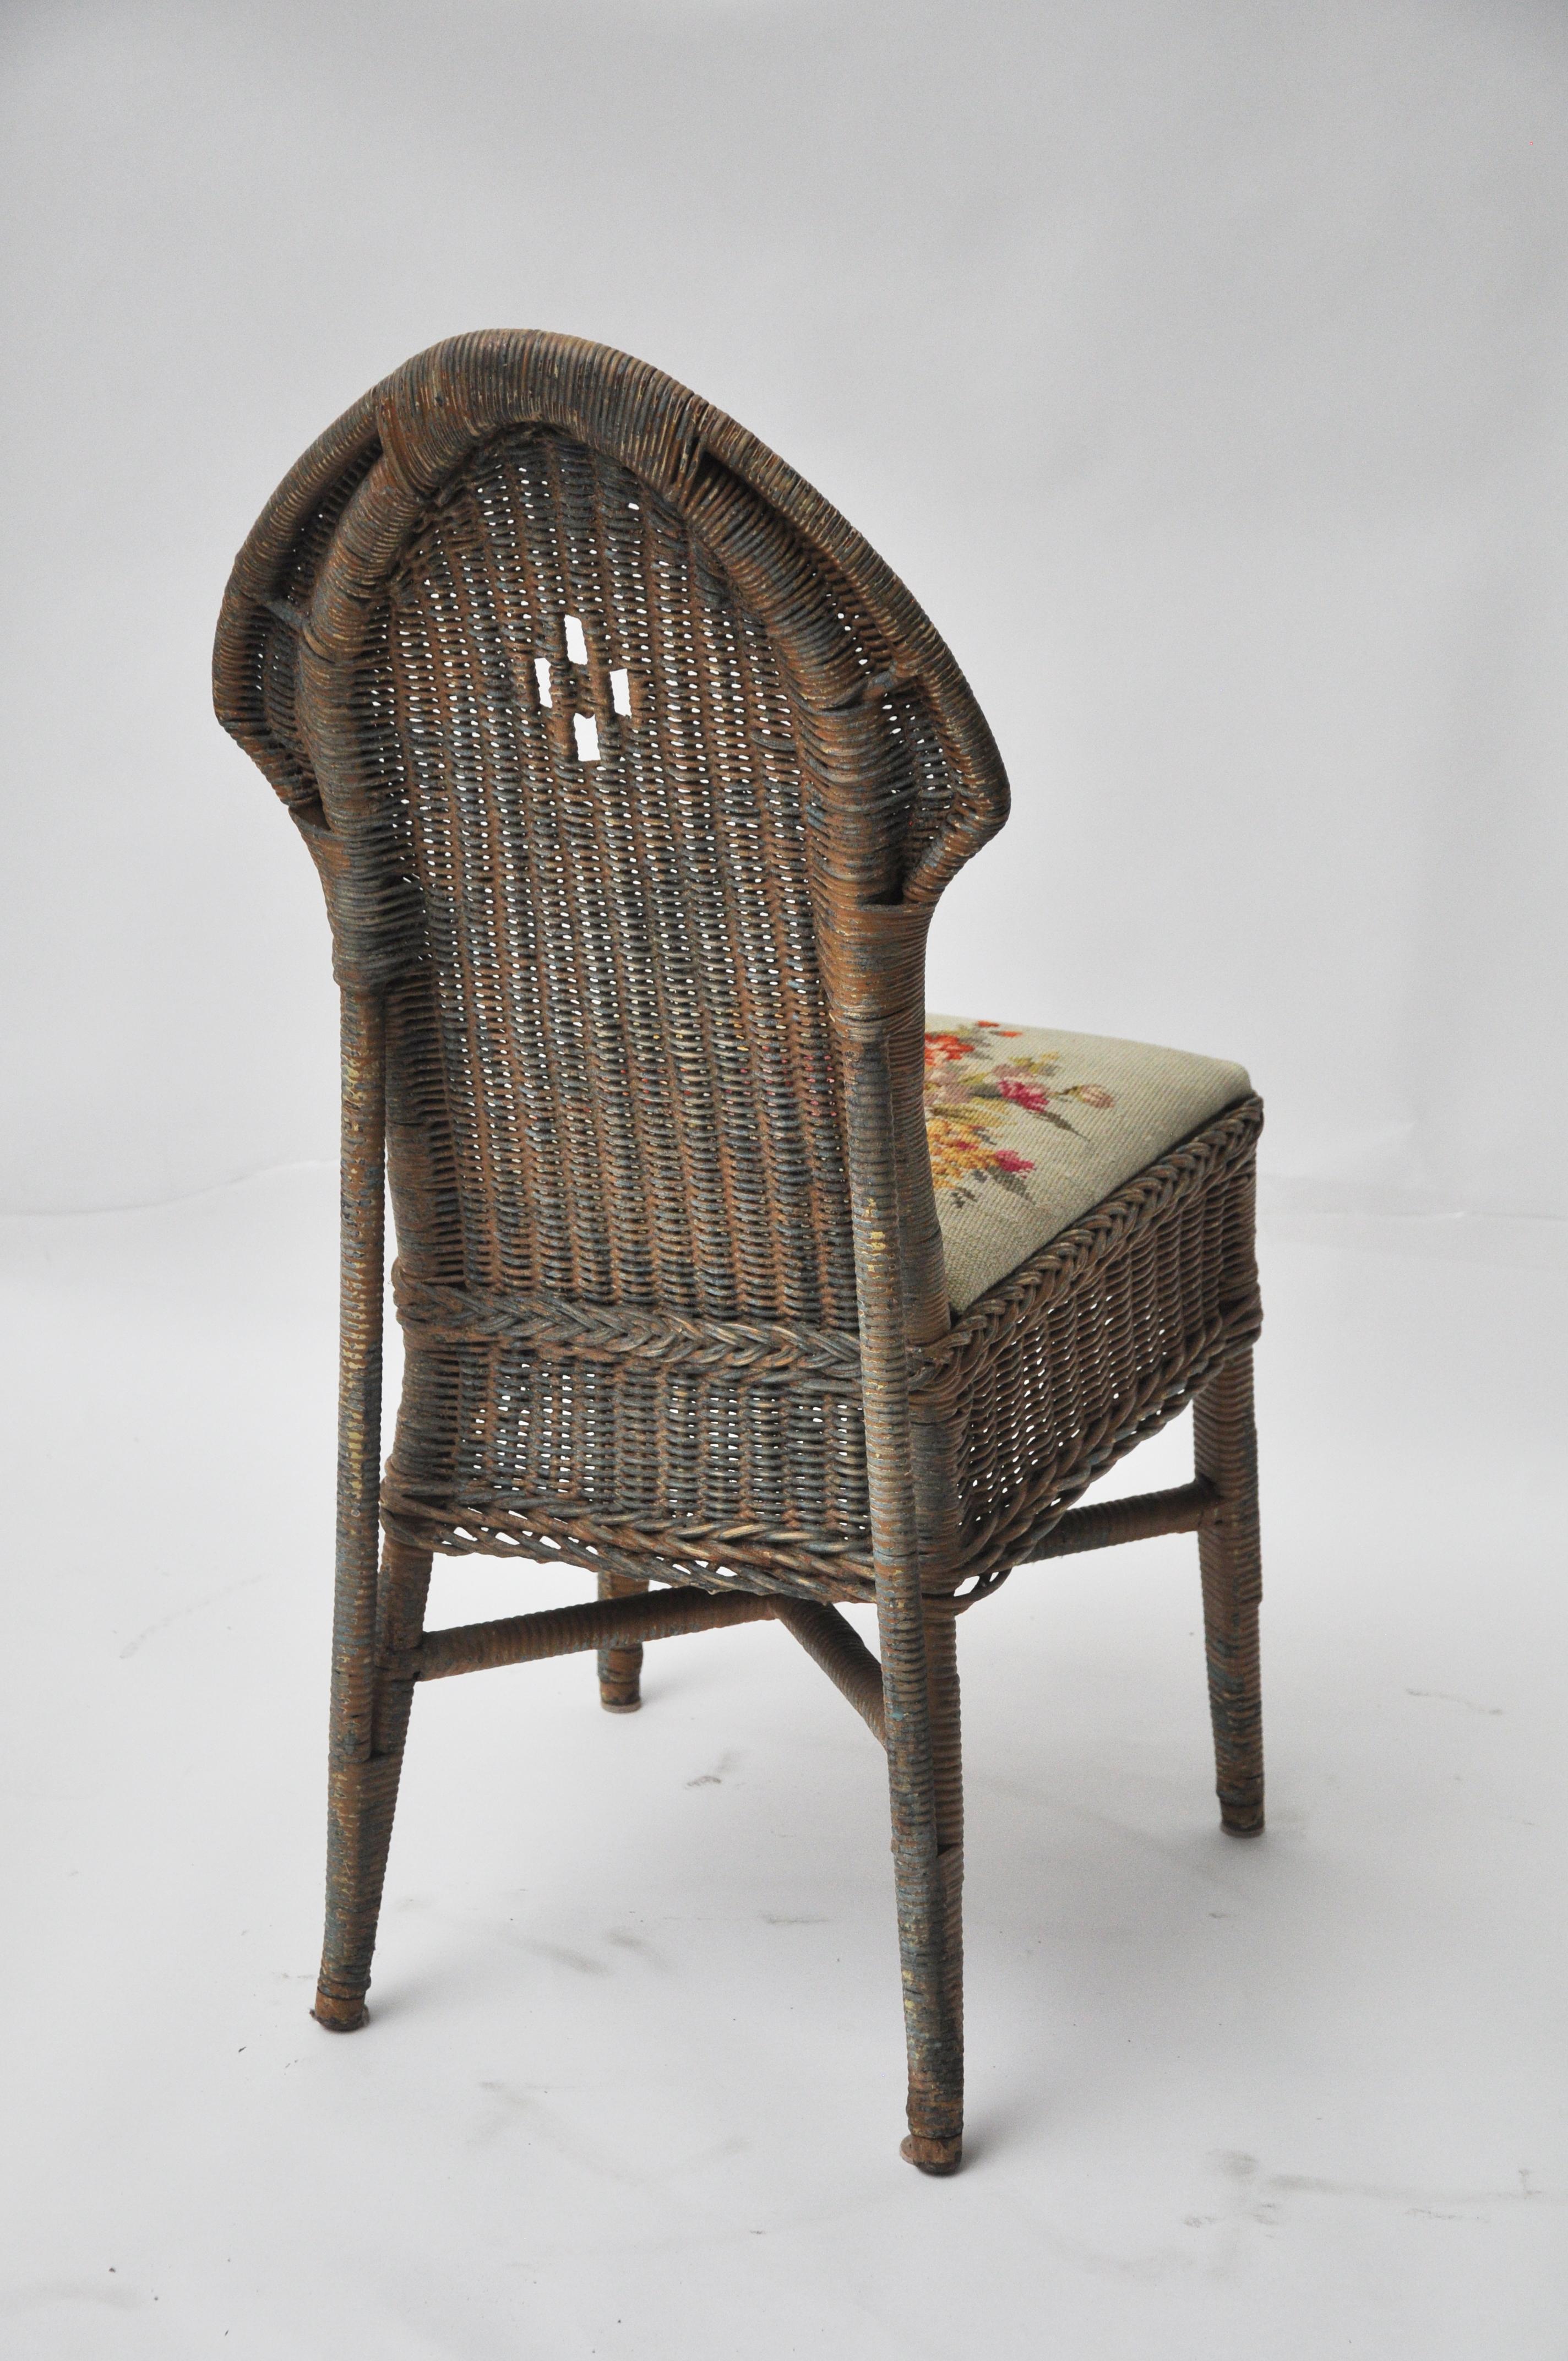 20th Century Wicker and Rattan Secretary Writing Desk with Matching Chair